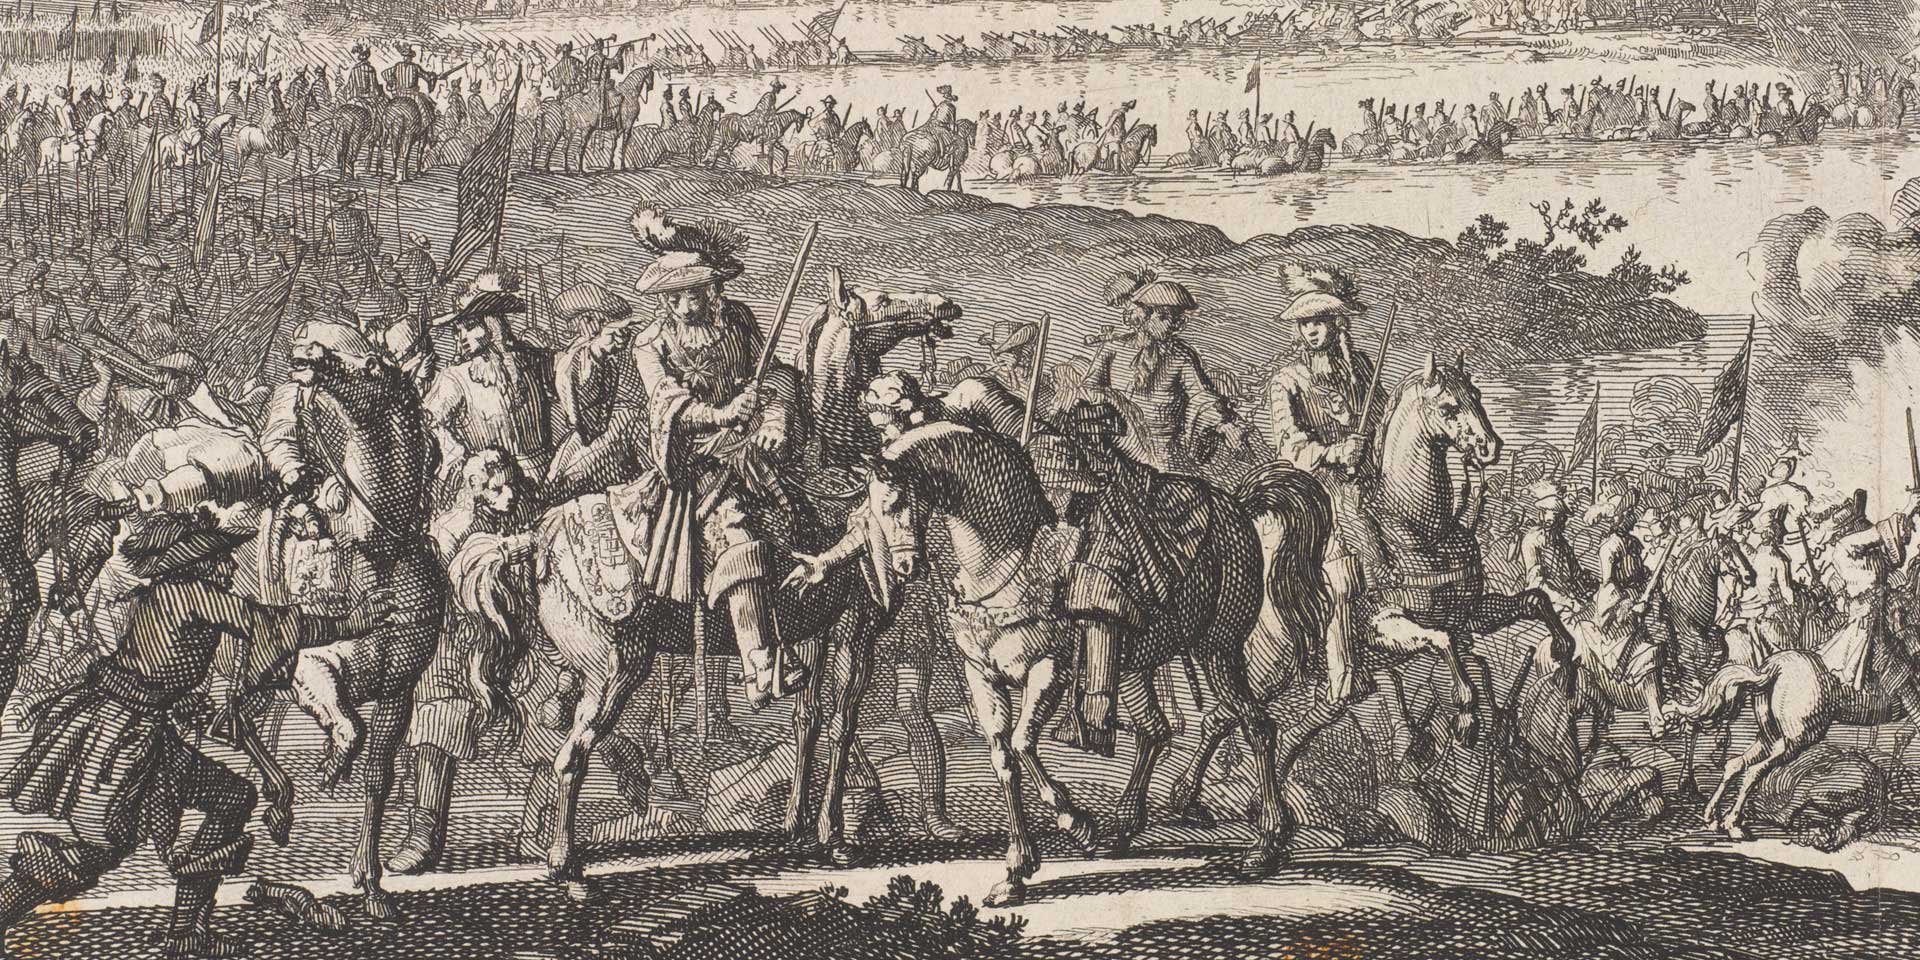 King William III wounded by a cannon ball at the Battle of the Boyne, 1690